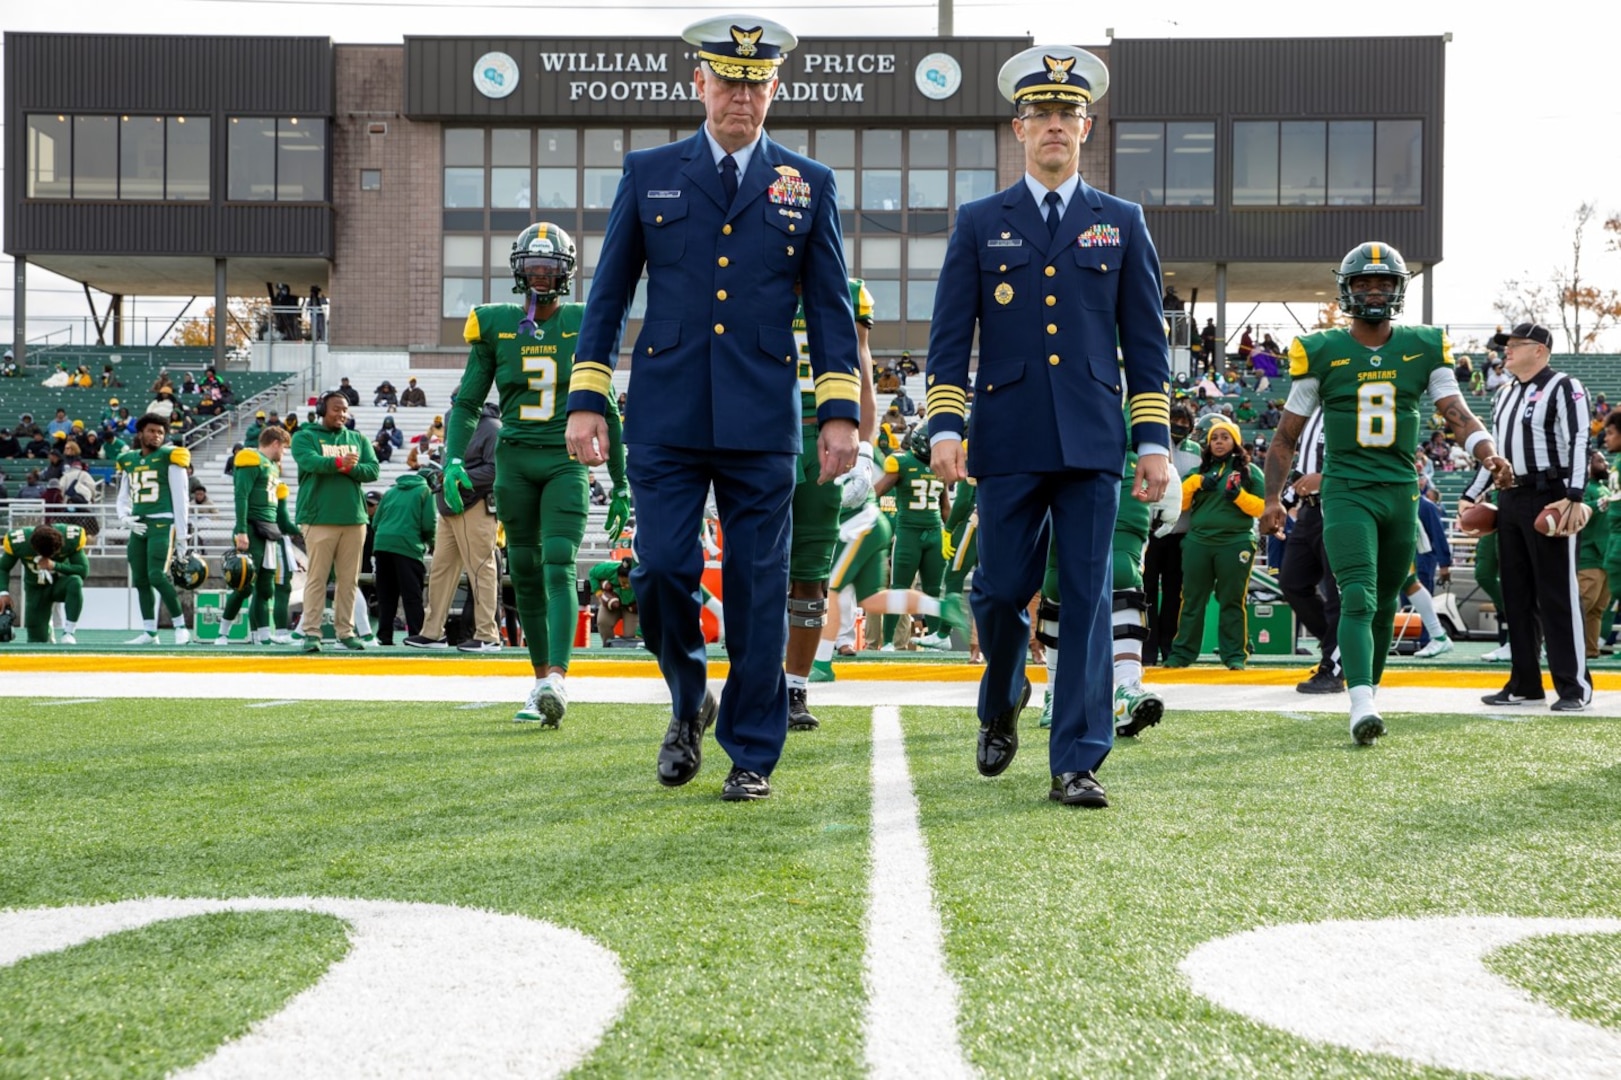 Rear Adm. Keith Smith and Capt. Samson Stevens join the Norfolk State University (NSU) team captains to conduct the coin toss at the First Responders and Military Appreciation Day/Senior Day football game, Nov. 20, 2021. Photo courtesy of NSU staff.